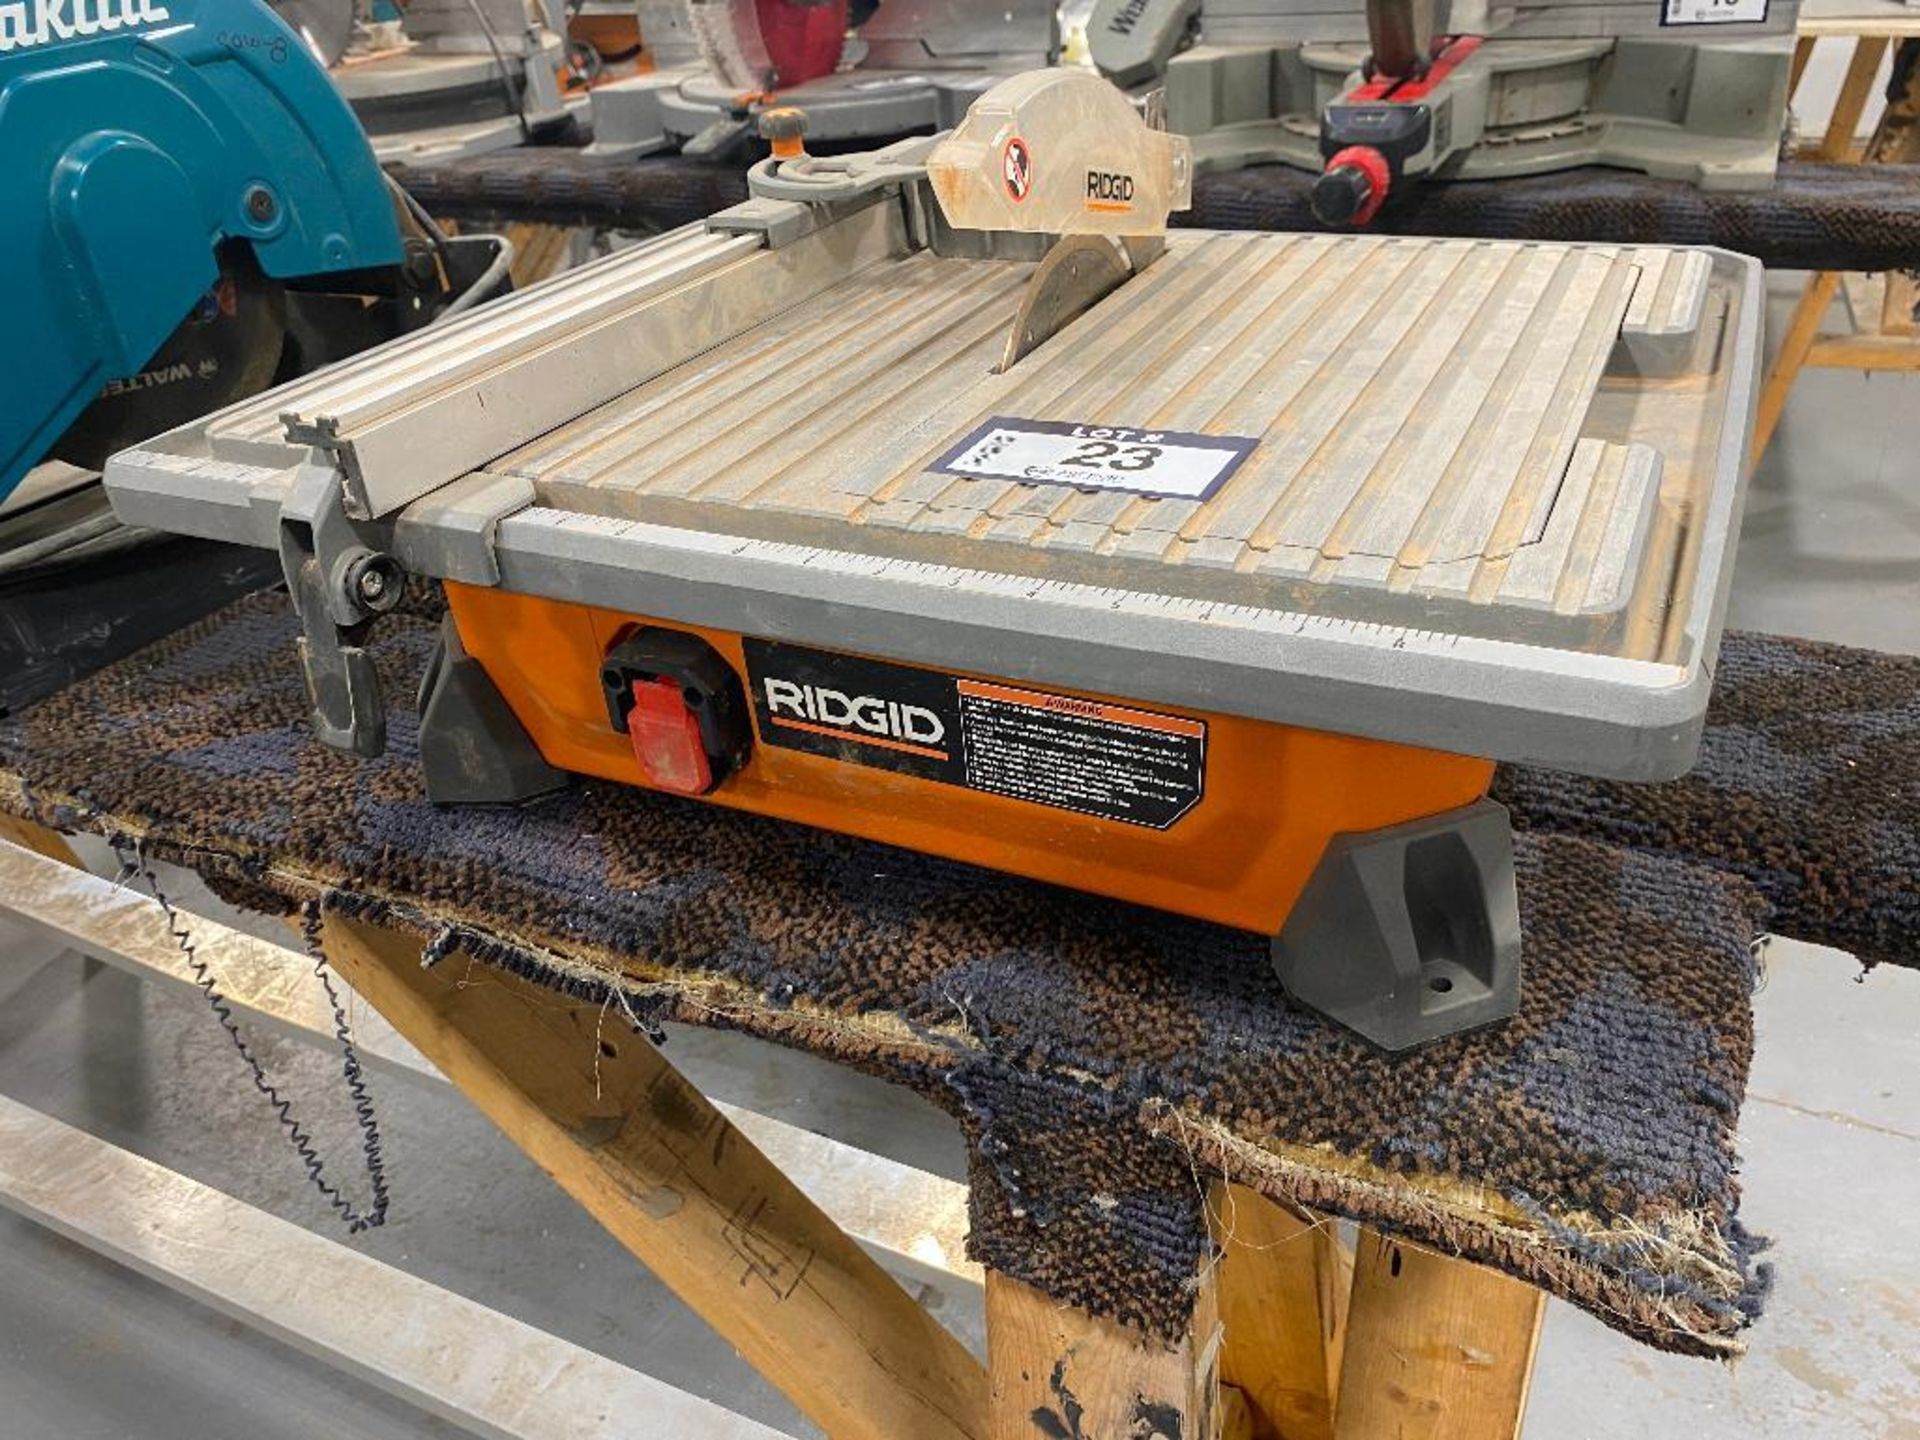 Ridgid R4020 7-Inch Table Top Wet Tile Saw